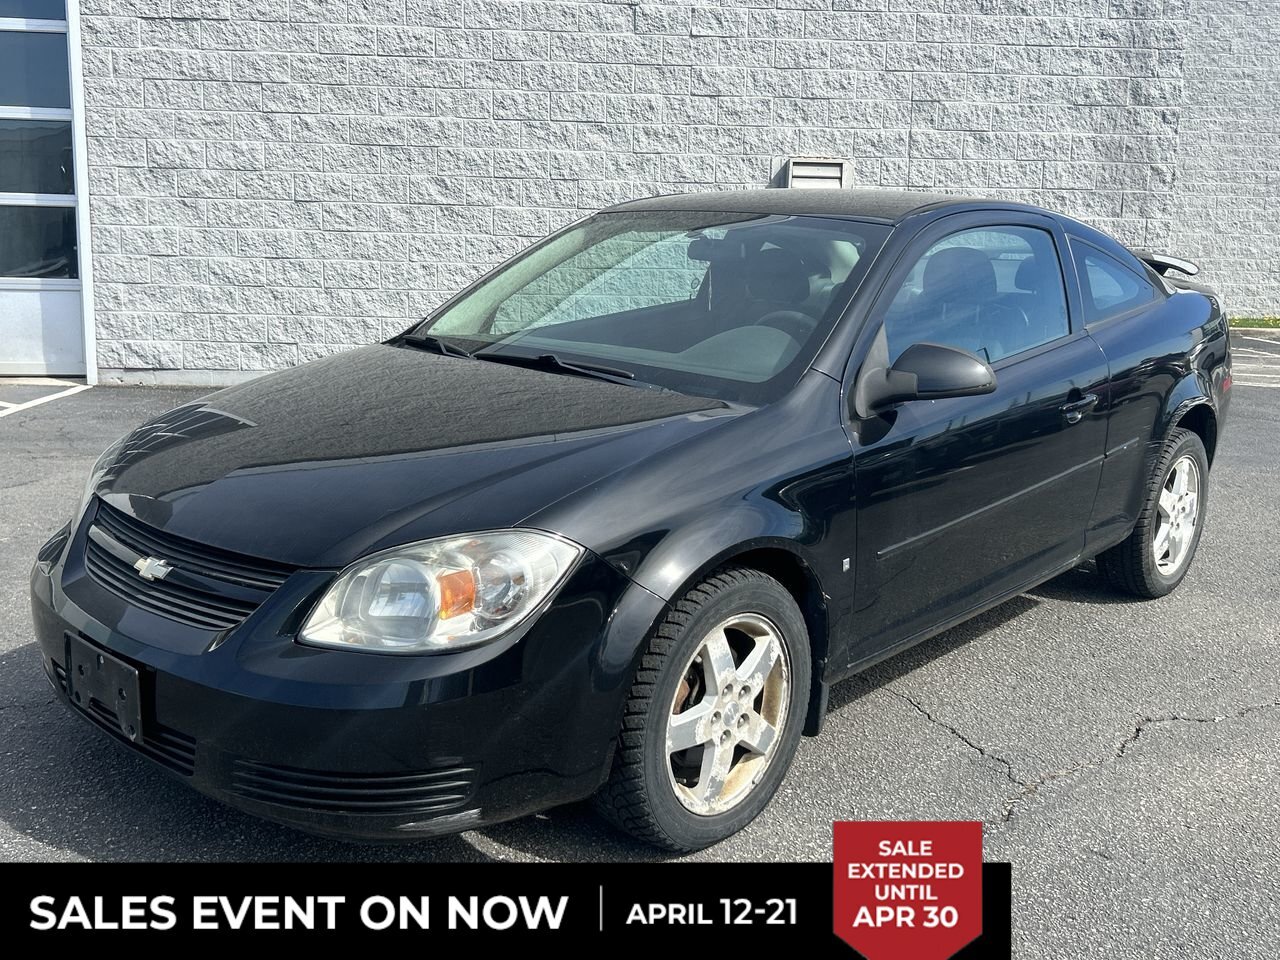 2009 Chevrolet Cobalt LT Coupe AS-IS SPECIAL